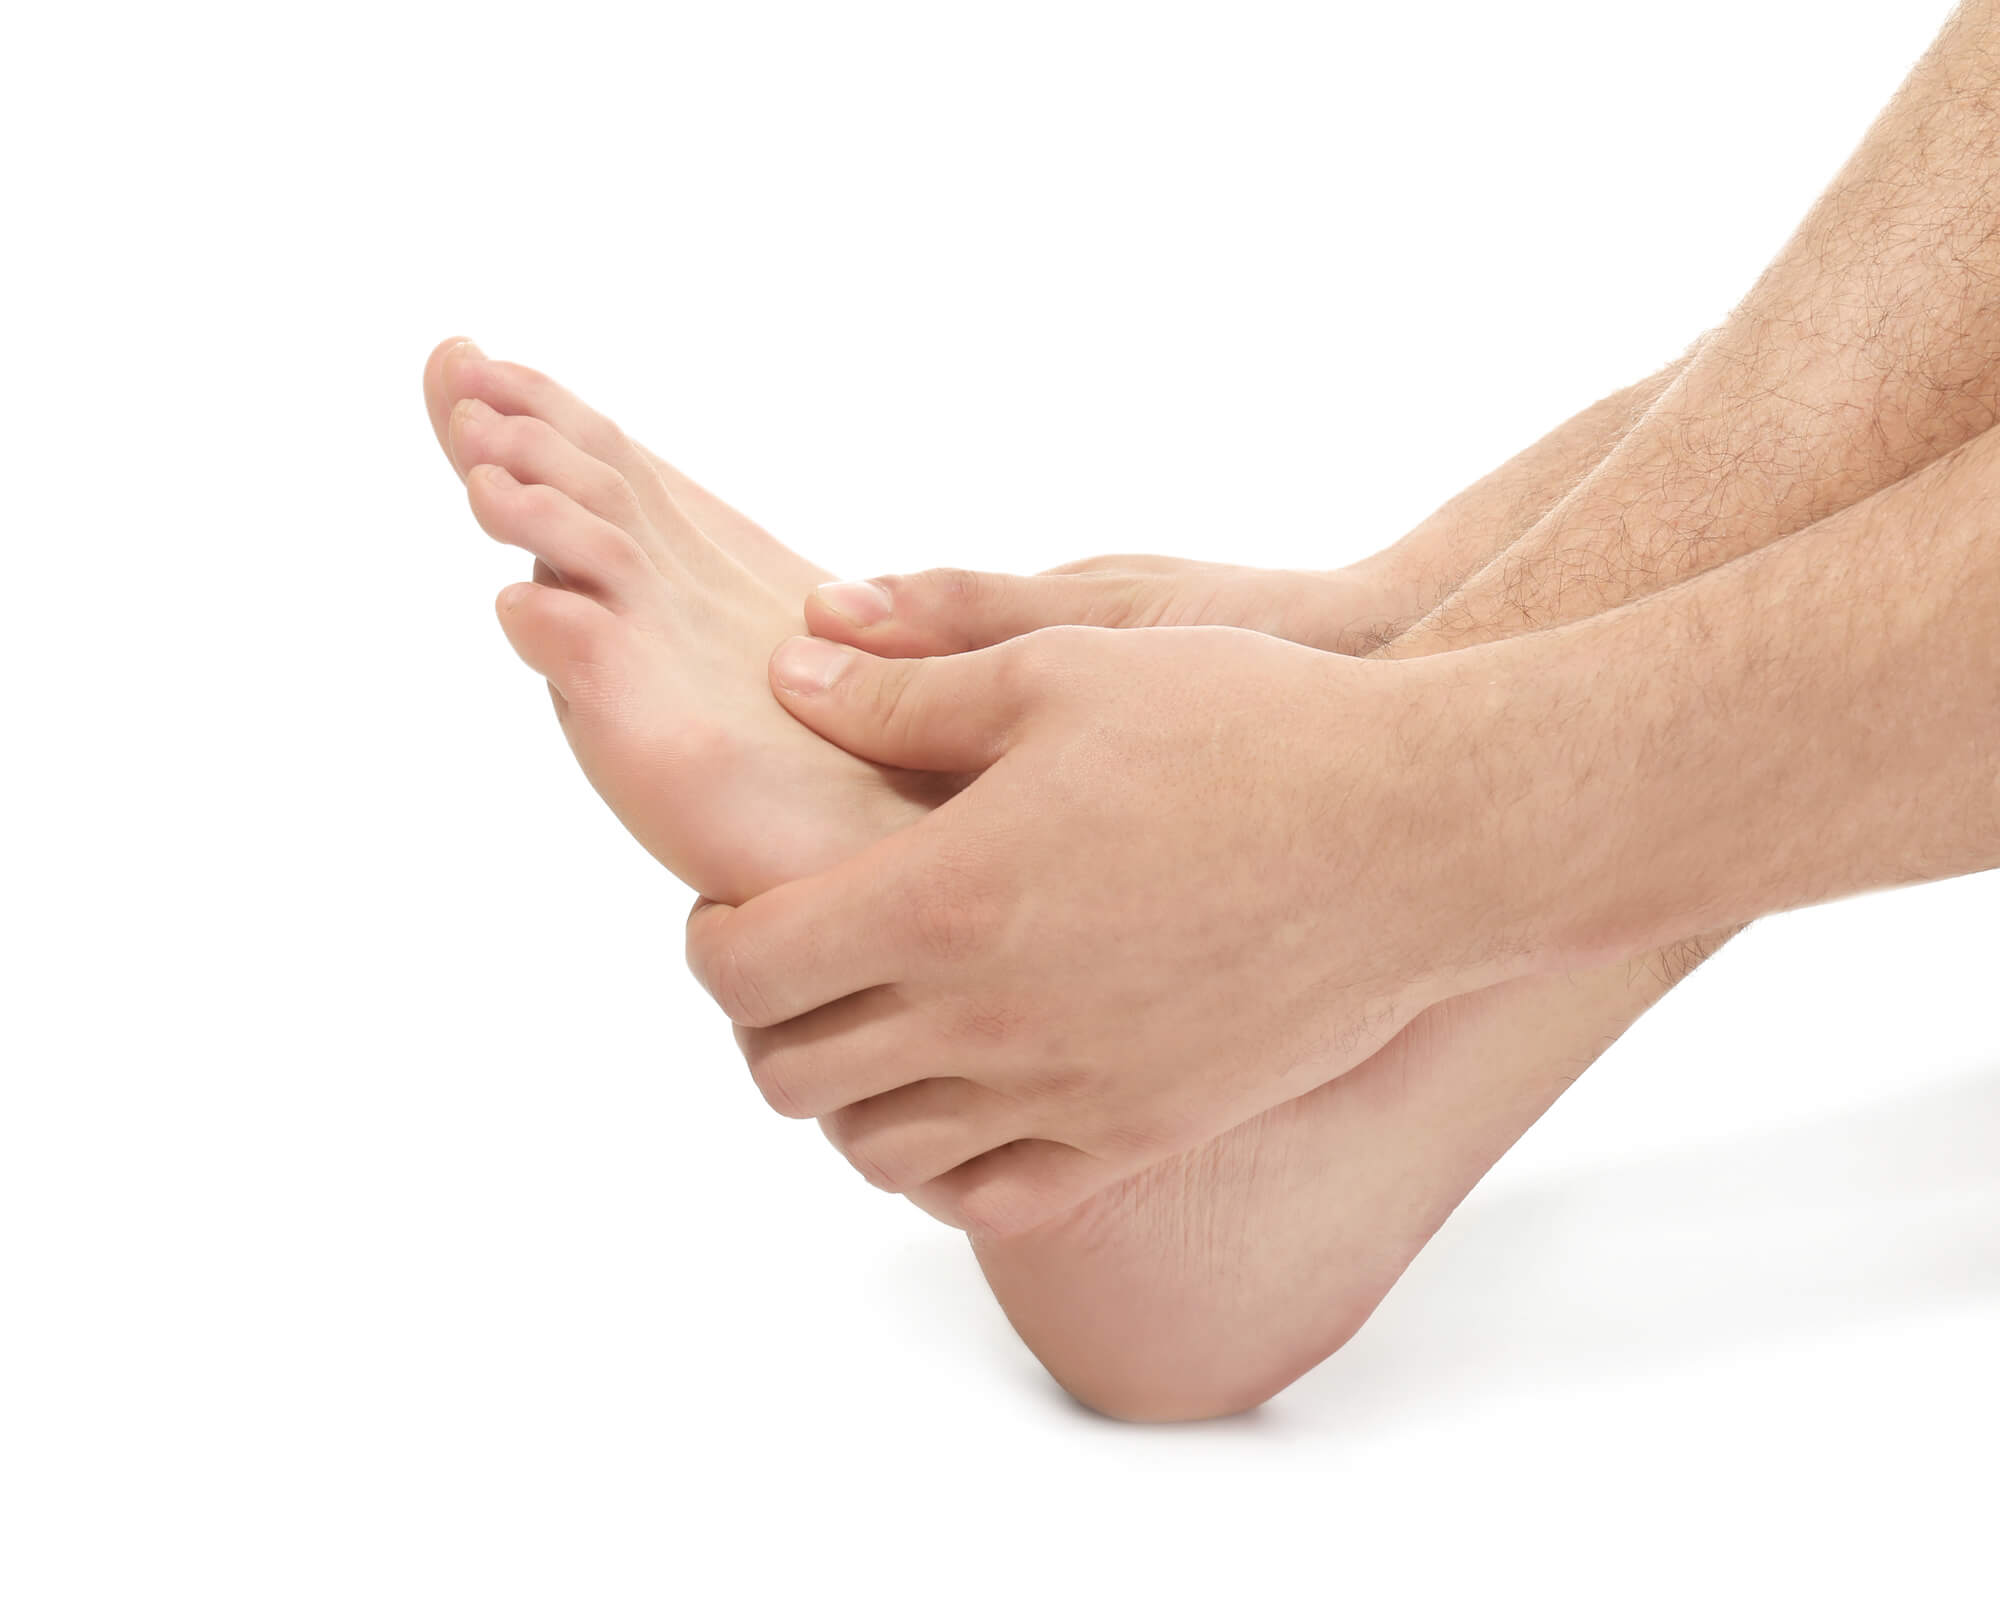 Man suffering from foot pain